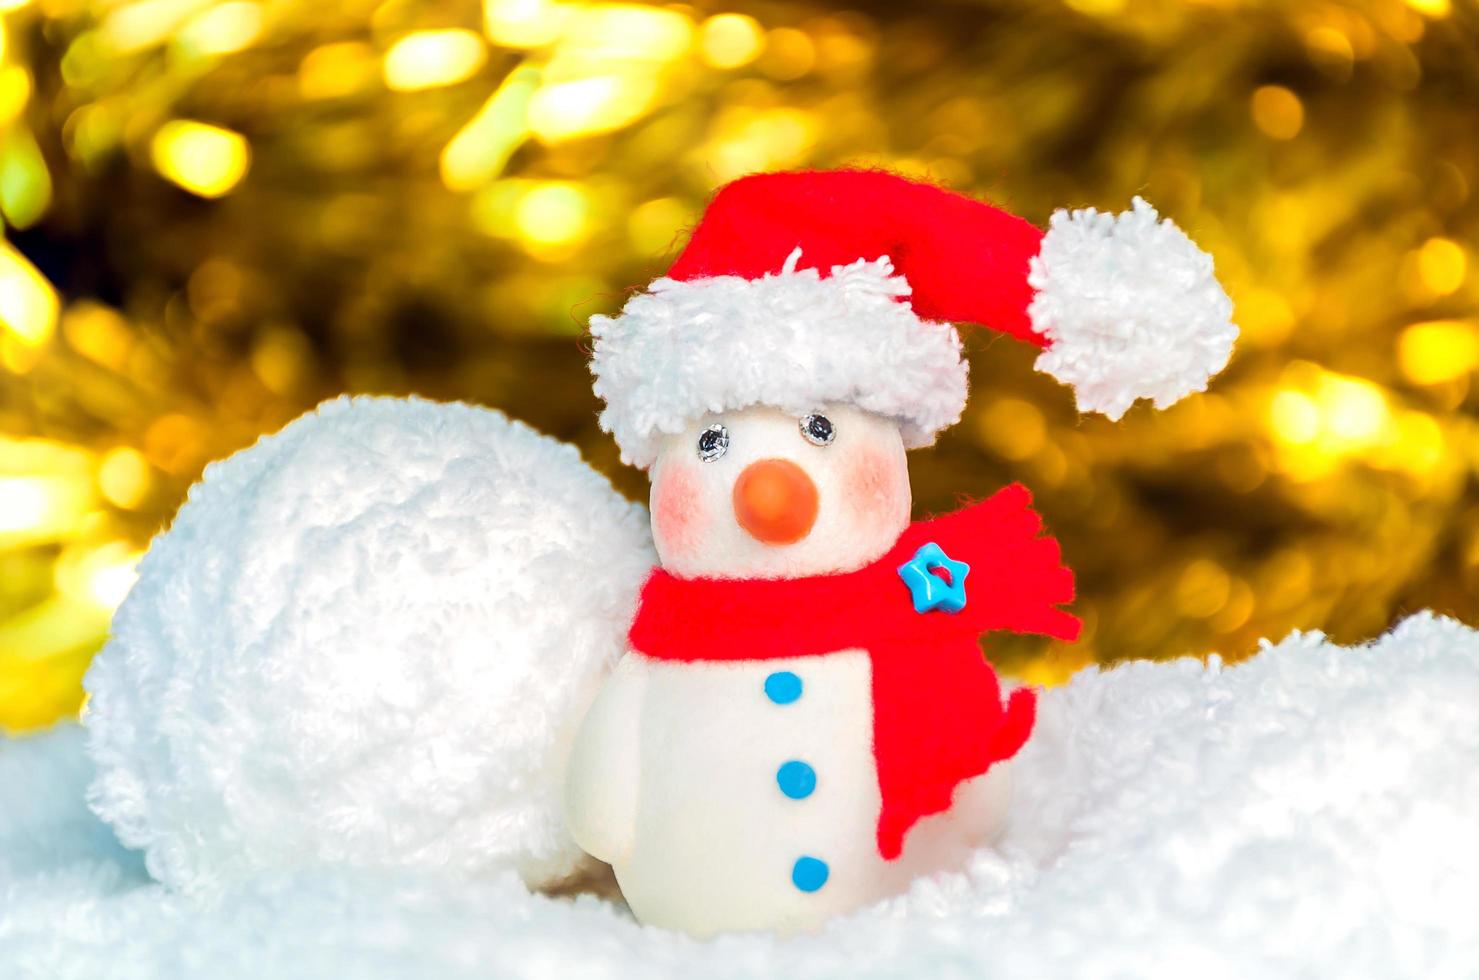 Snow man over blurred shiny yellow strip, and white background for Christmas new year decoration photo